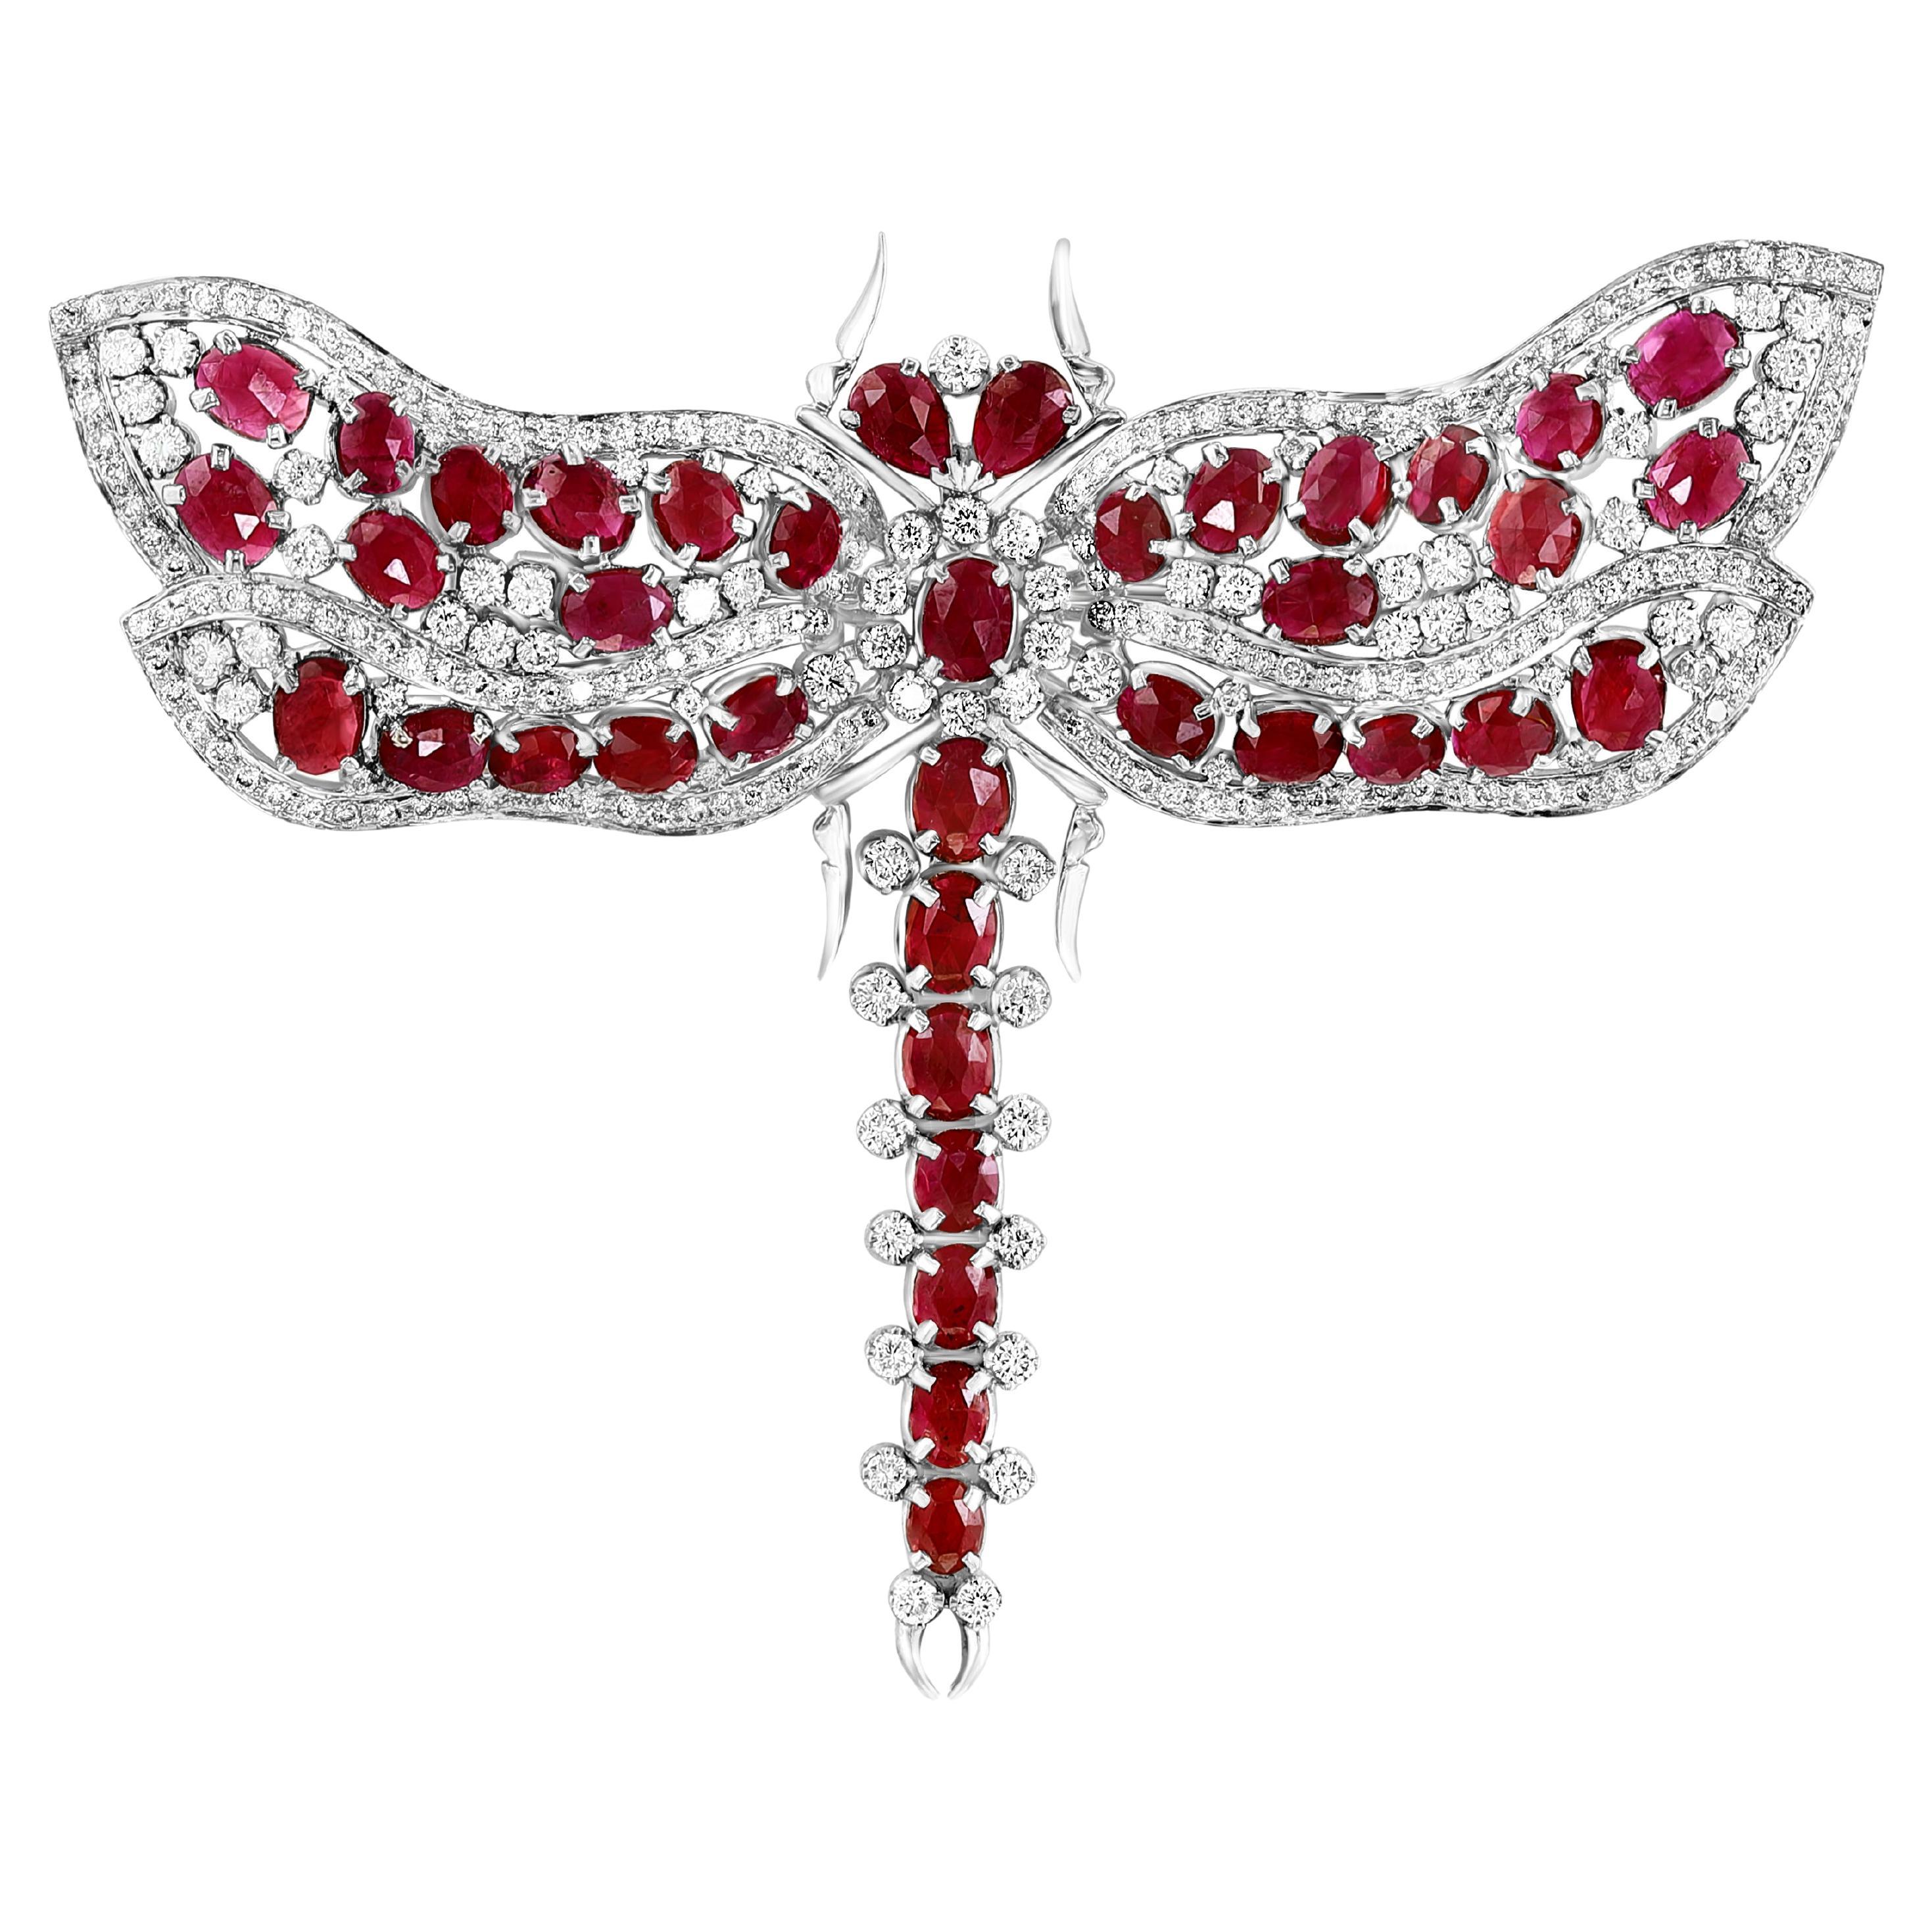 Natural 20 Ct Burma Ruby & 10 Ct Diamond Butterfly 18 Kt White Gold Pin/Brooch For Sale